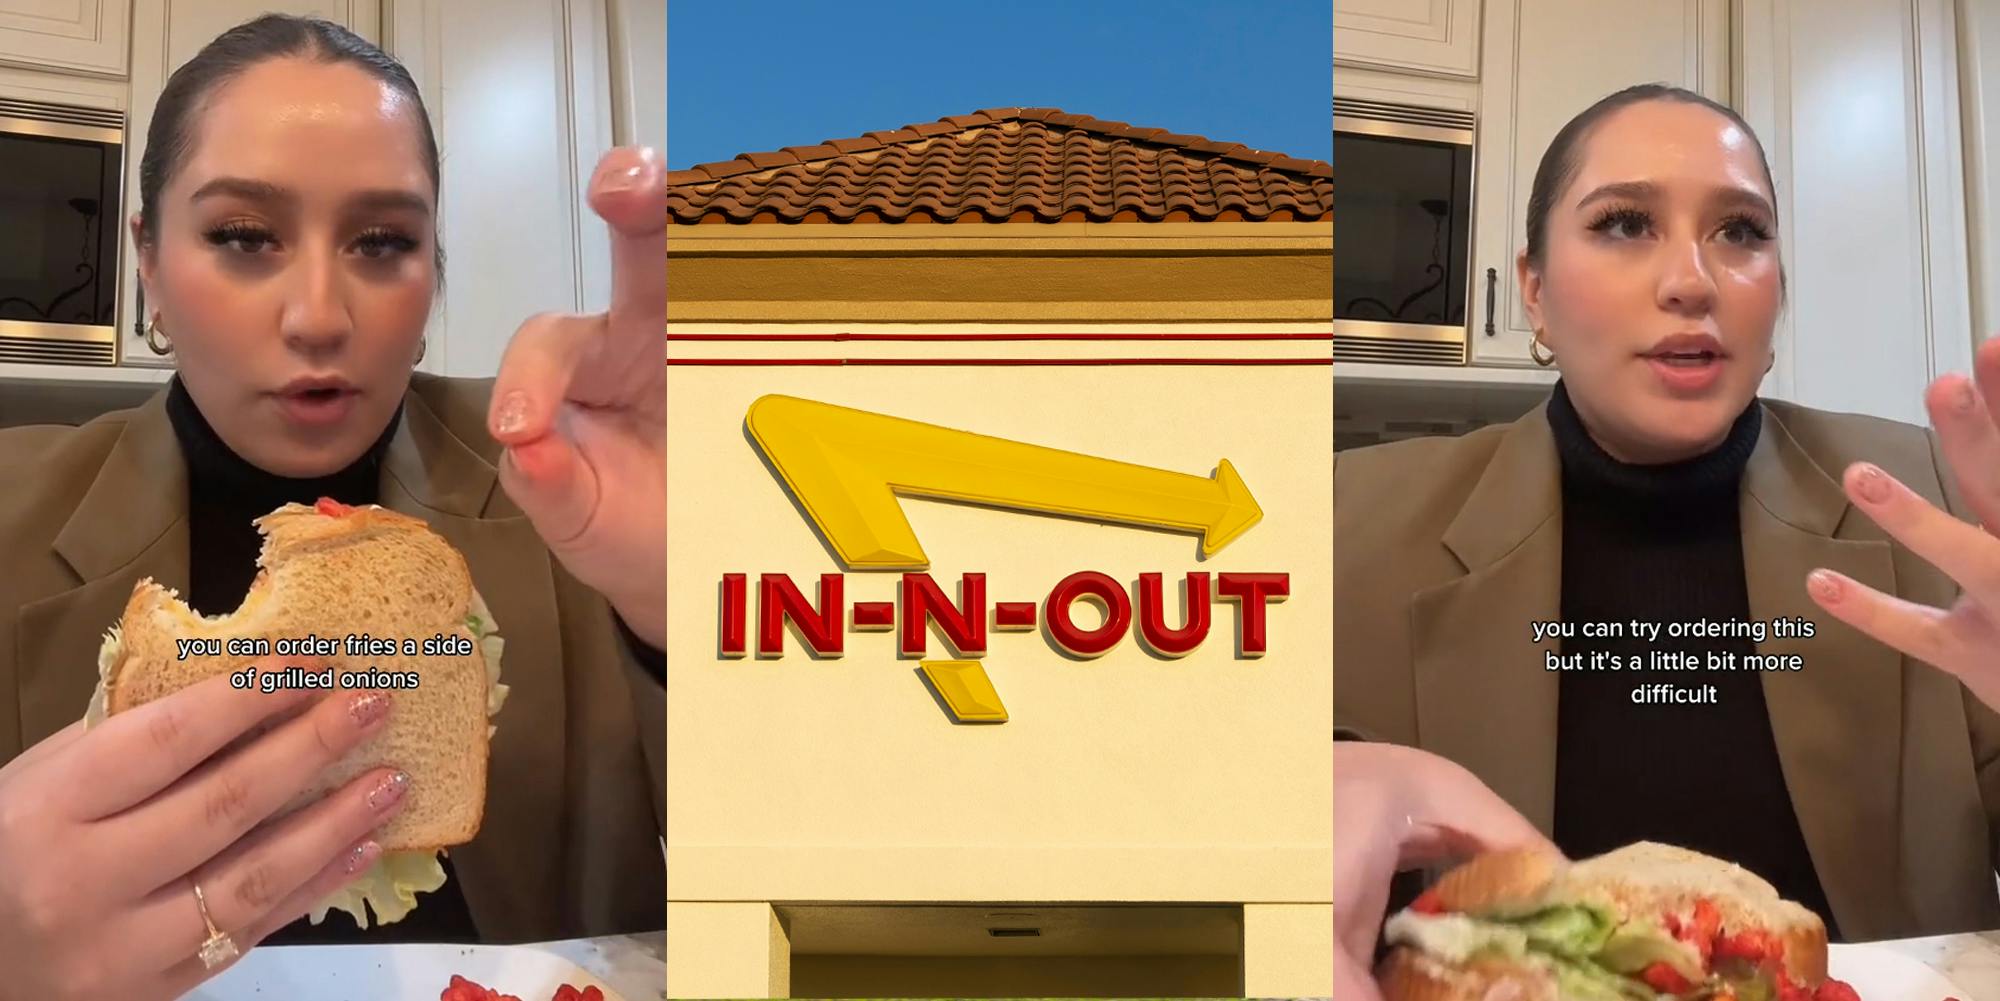 former IN-N-Out worker speaking while eating sandwich with caption "you can order fries a side of grilled onions" (l) In-N-Out sign on building (c) former IN-N-Out worker speaking while eating sandwich with caption "you can try ordering this but it's a little bit more difficult" (r)